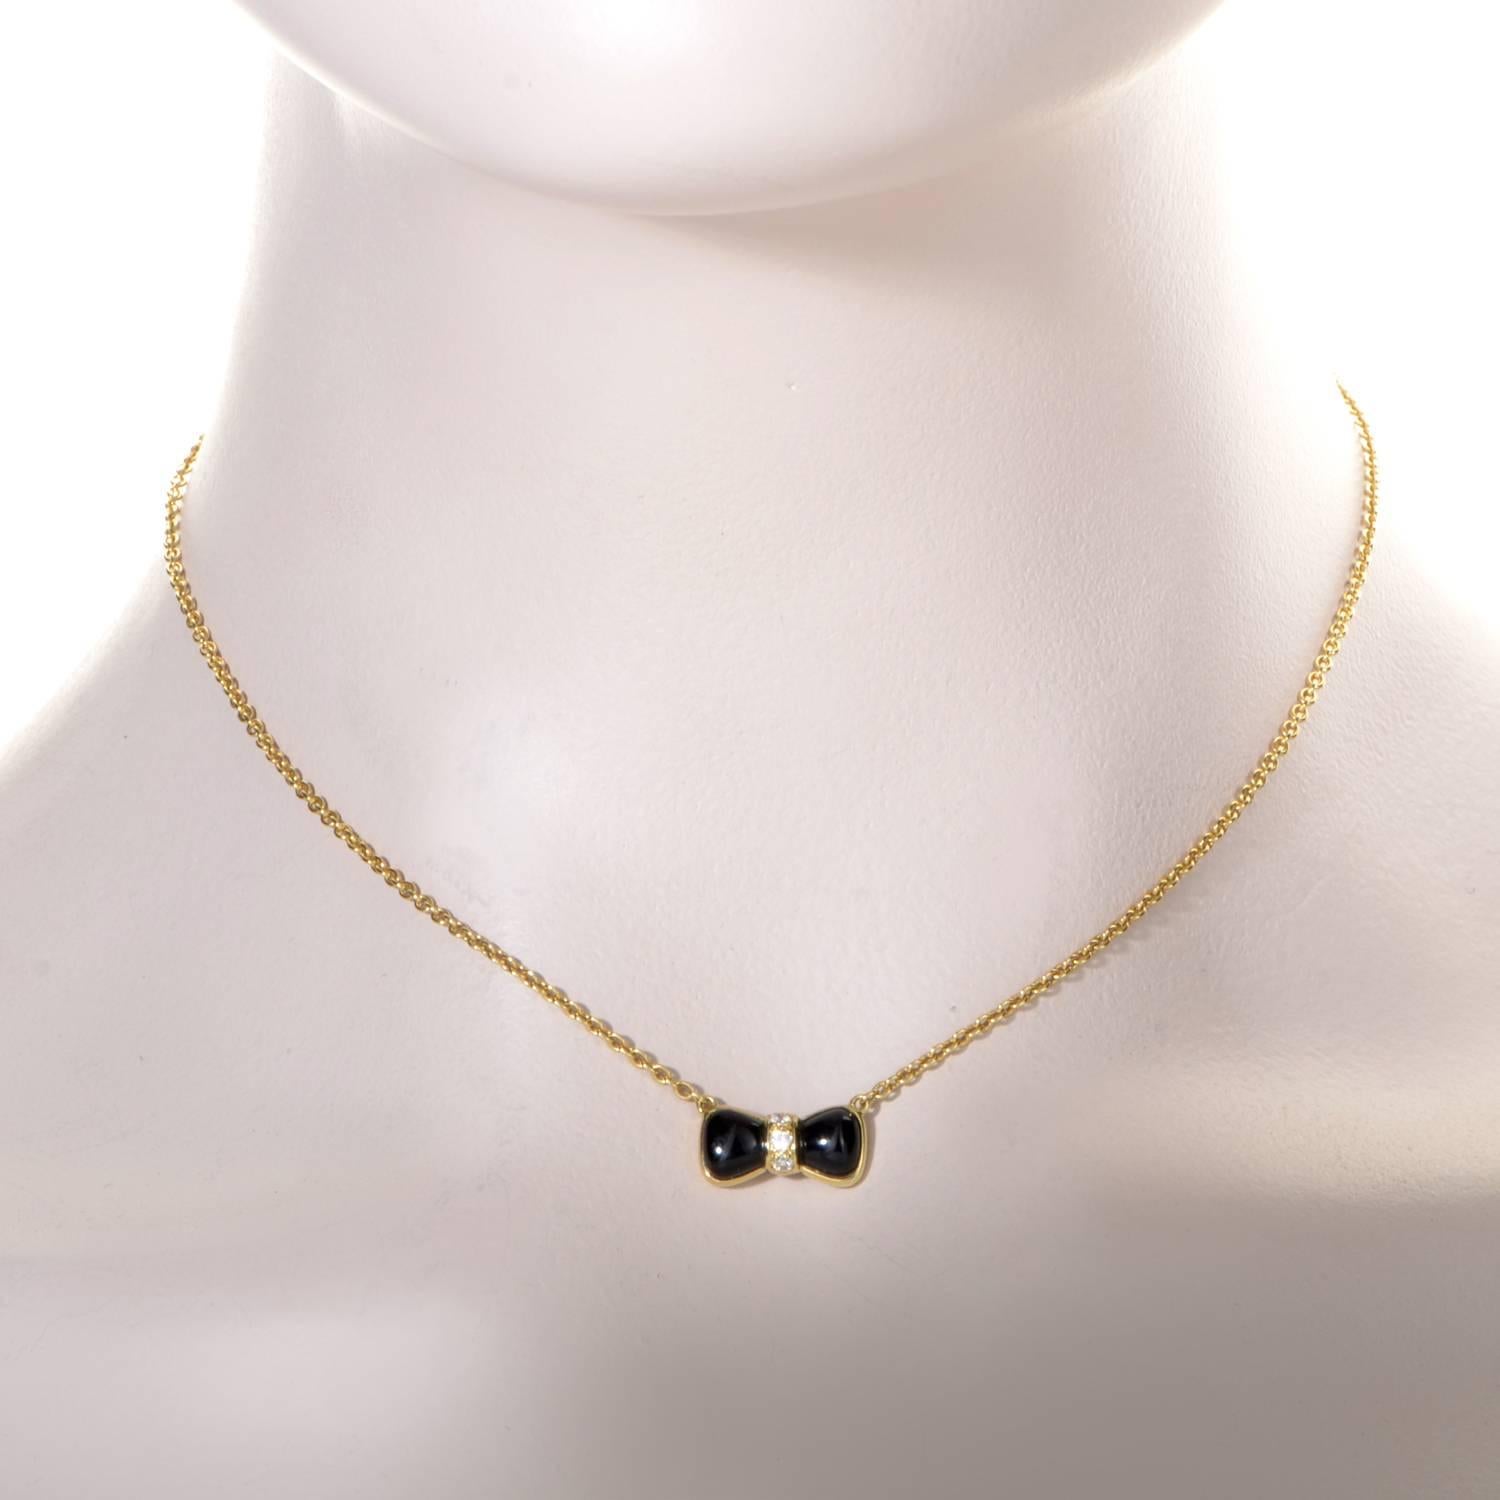 Van Cleef & Arpels Onyx Diamond Gold Bow Pendant Necklace im Zustand „Hervorragend“ in Southampton, PA